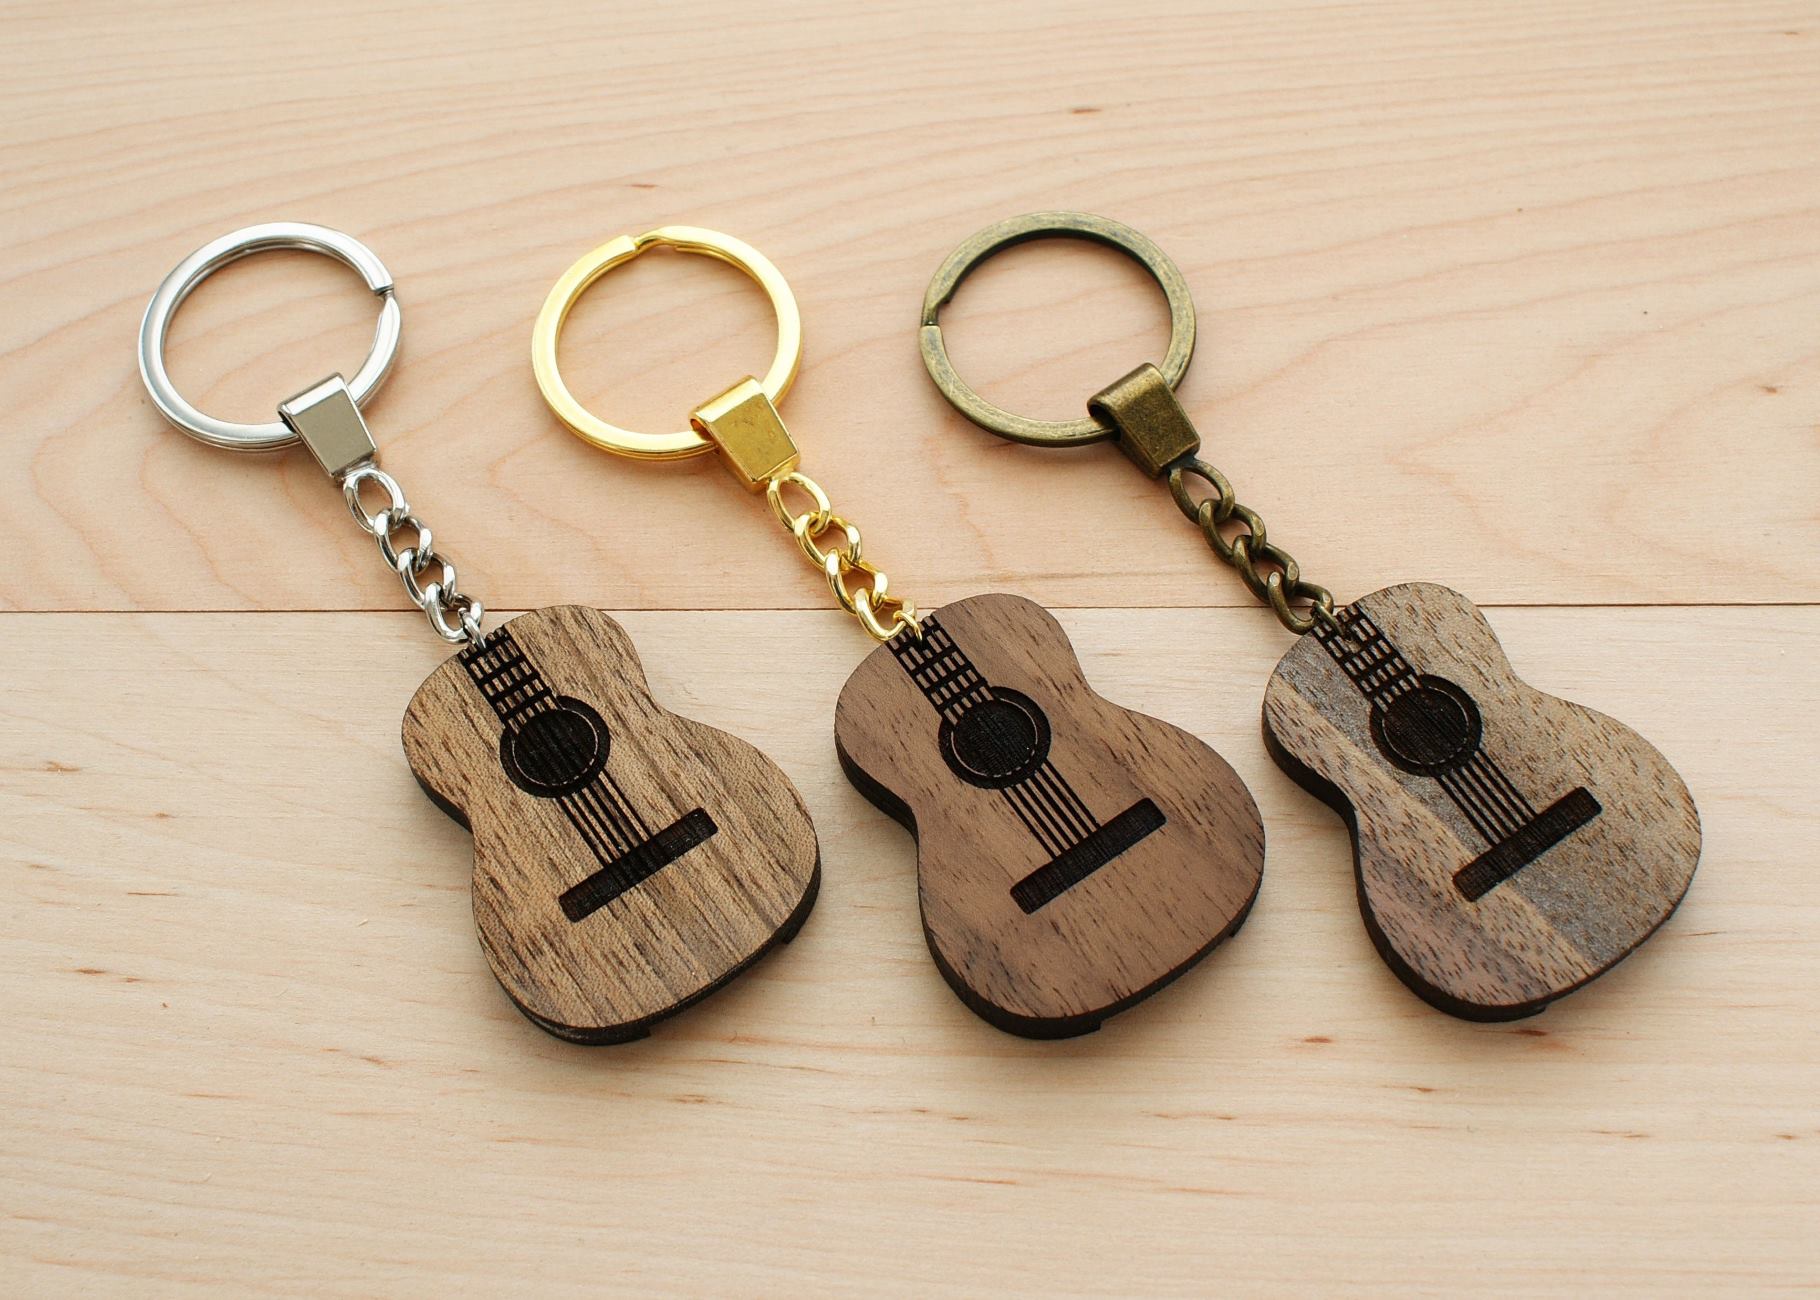 Rock Your Keys with this Guitar-Shaped Keychain: A Perfect Gift for Him